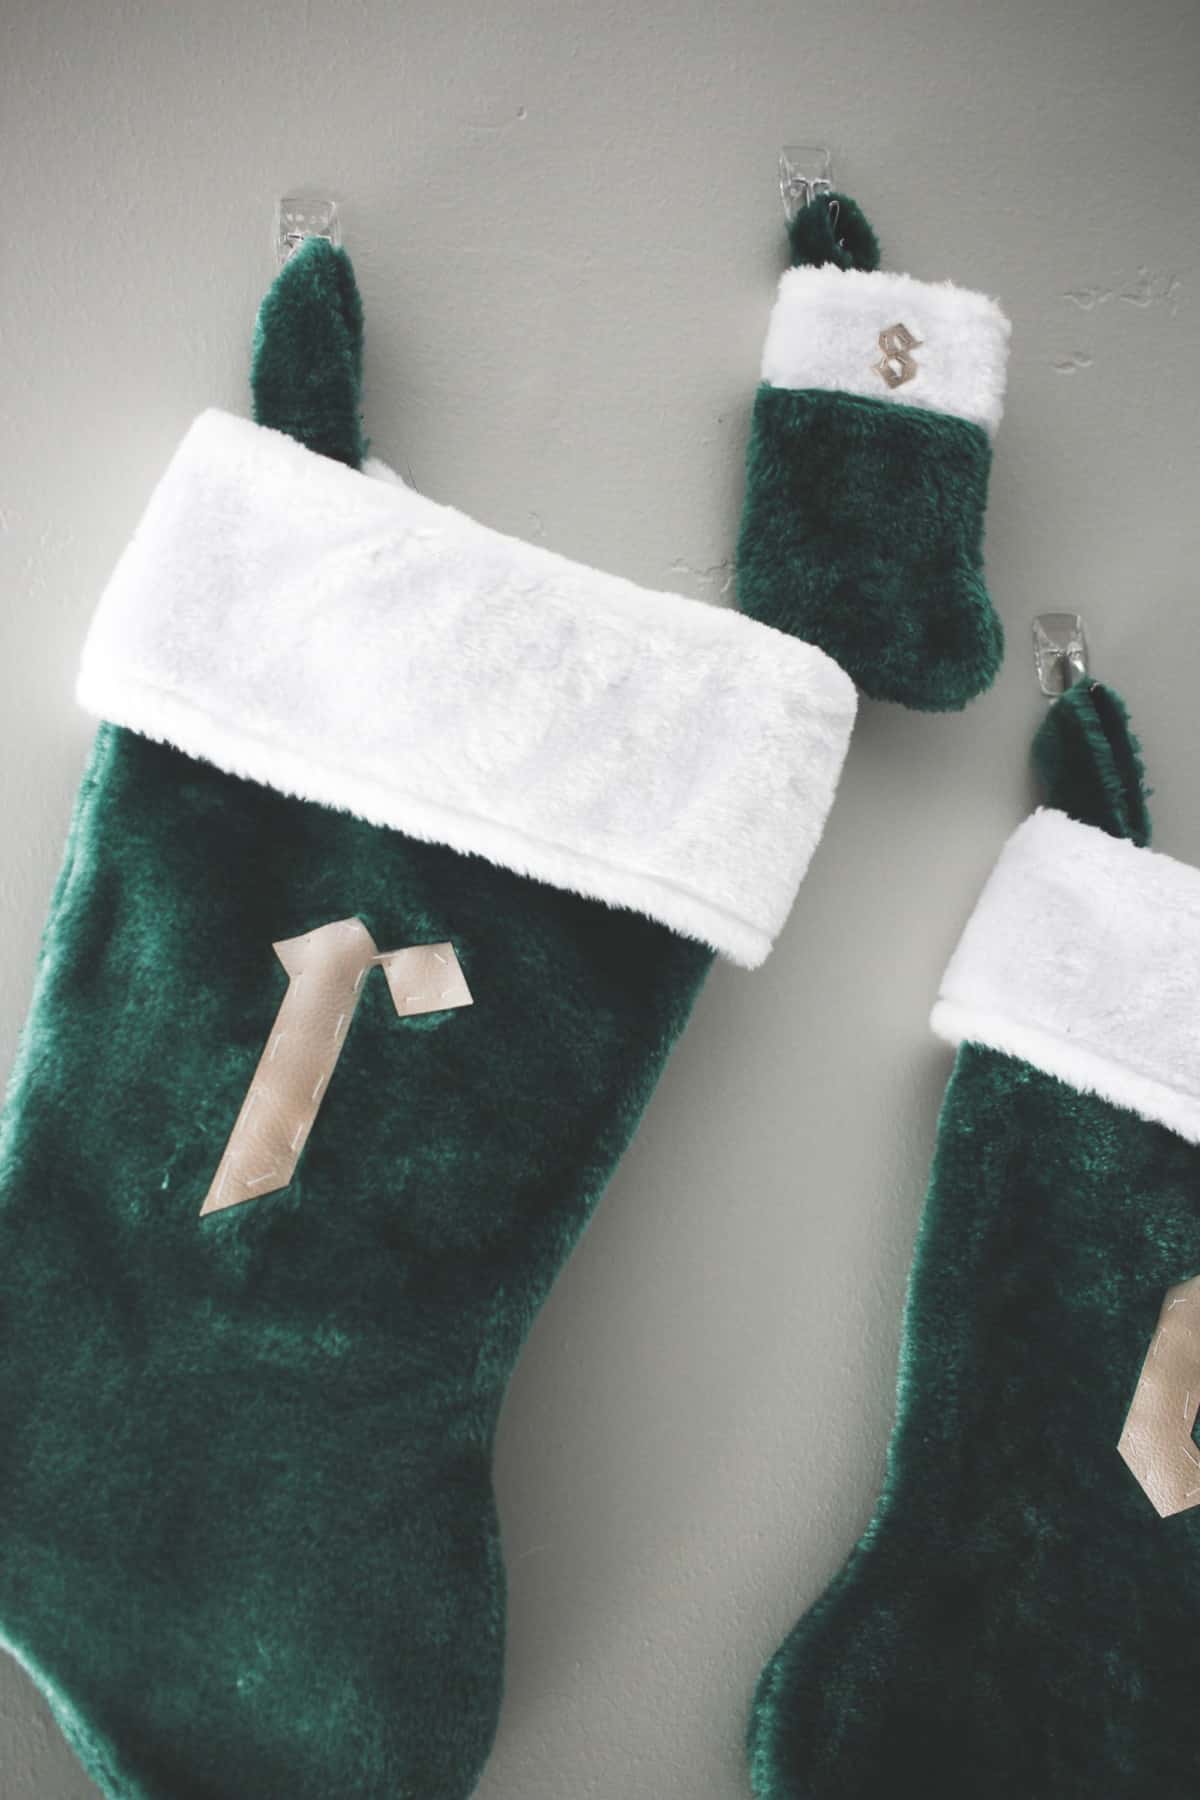 The Cricut made these DIY stockings a breeze! i love having each of our initials monogrammed and I only spent $2!